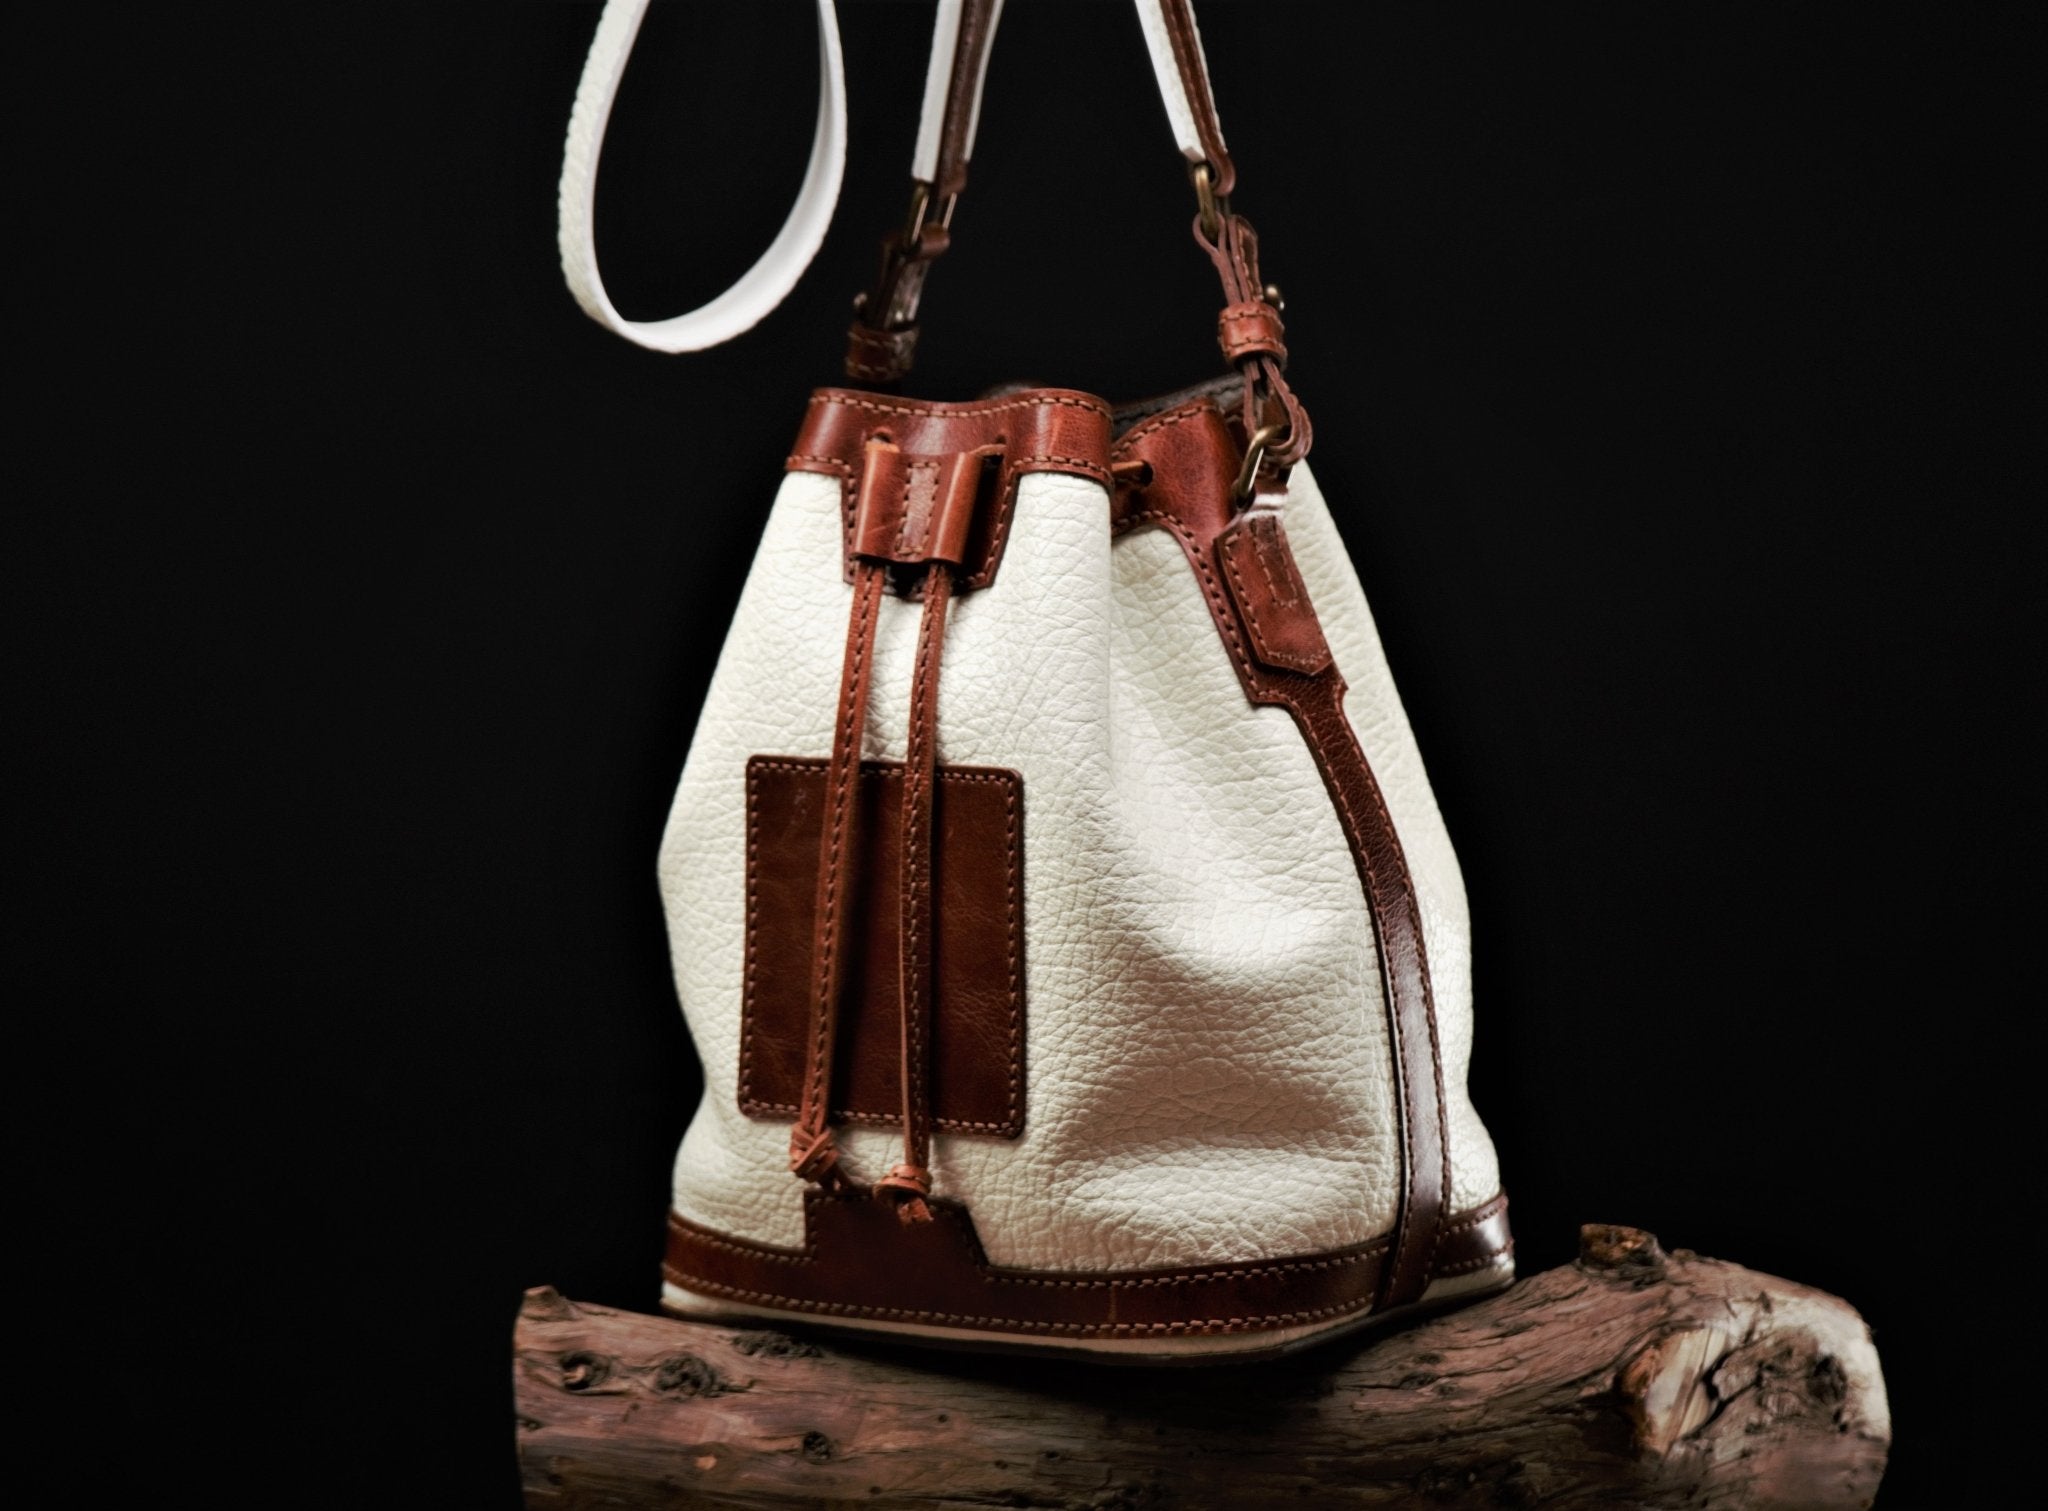 PDF Pattern Aria Bucket Bag, Instructional Video by Vasile and Pavel - Vasile and Pavel Leather Patterns